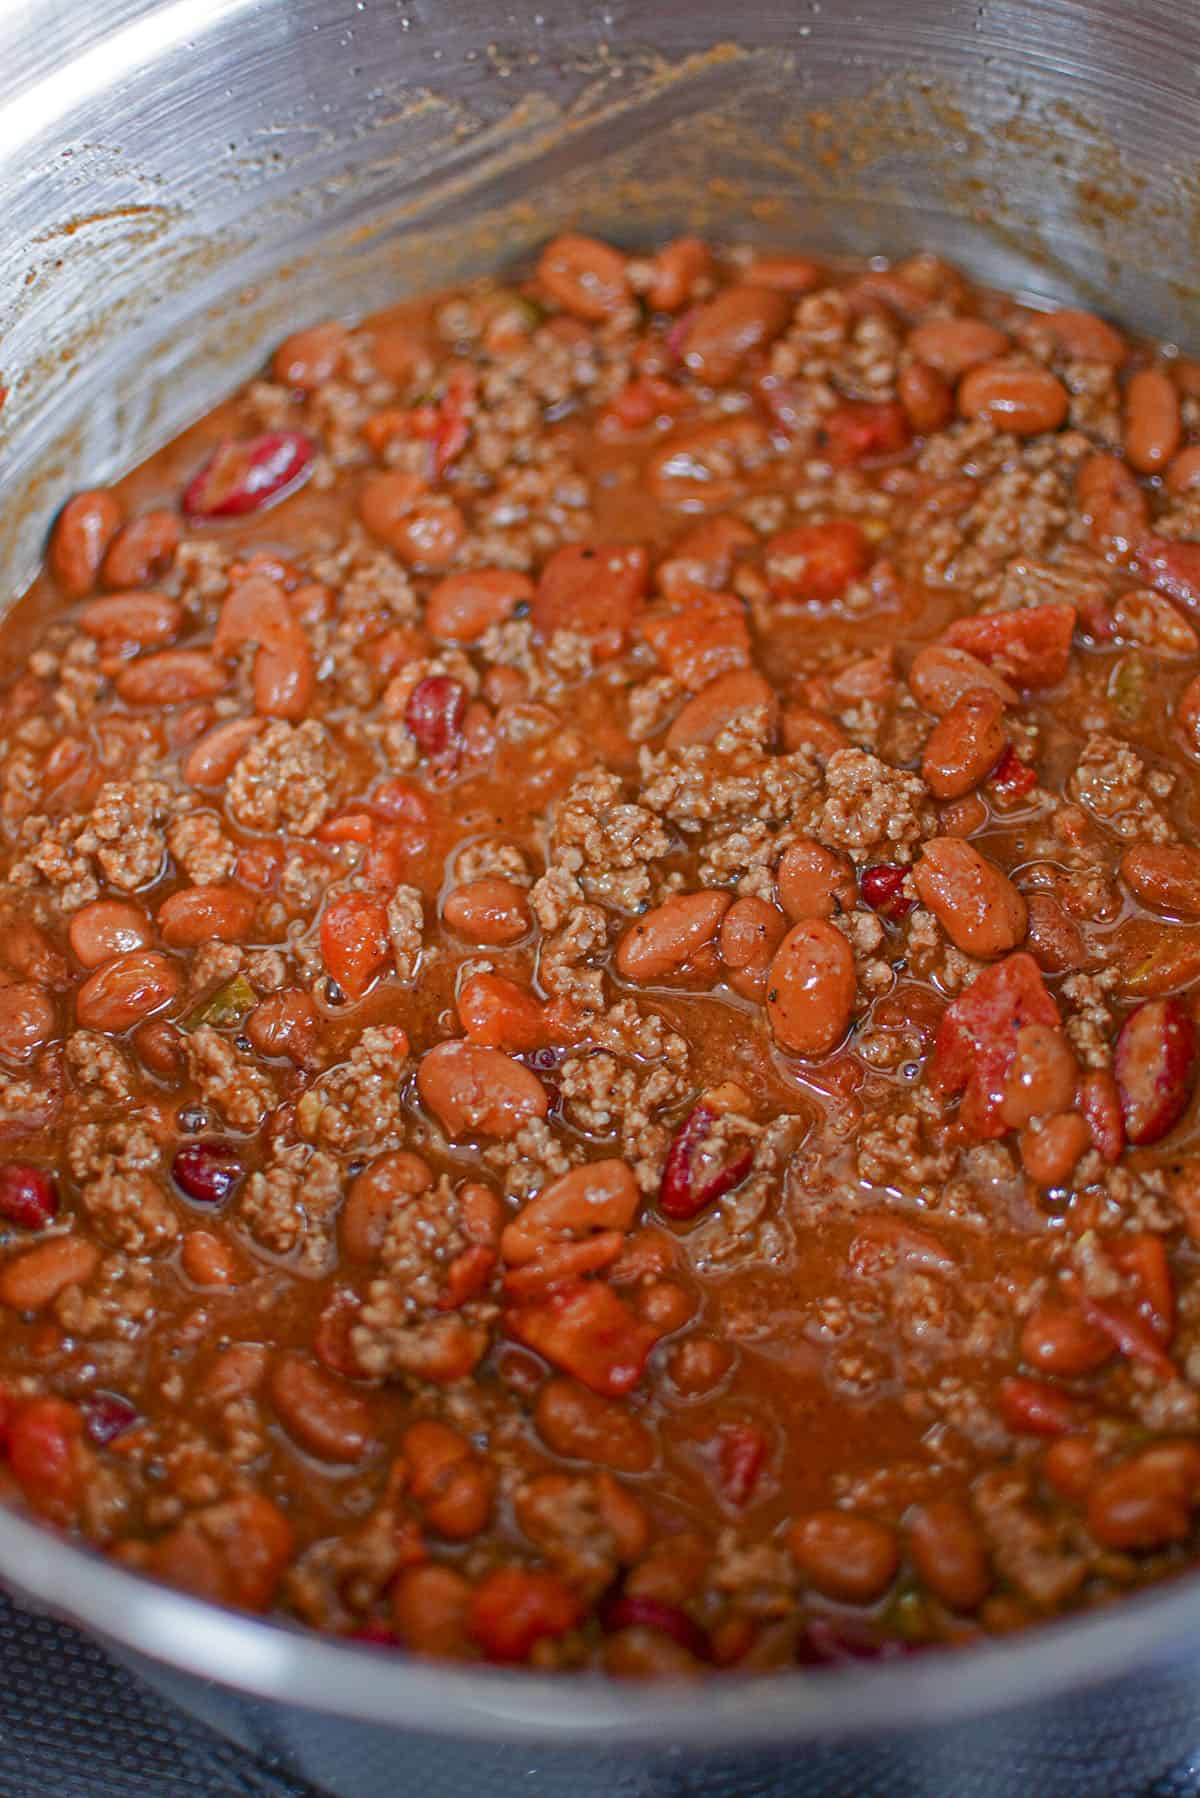 The finished chili in the pot. 